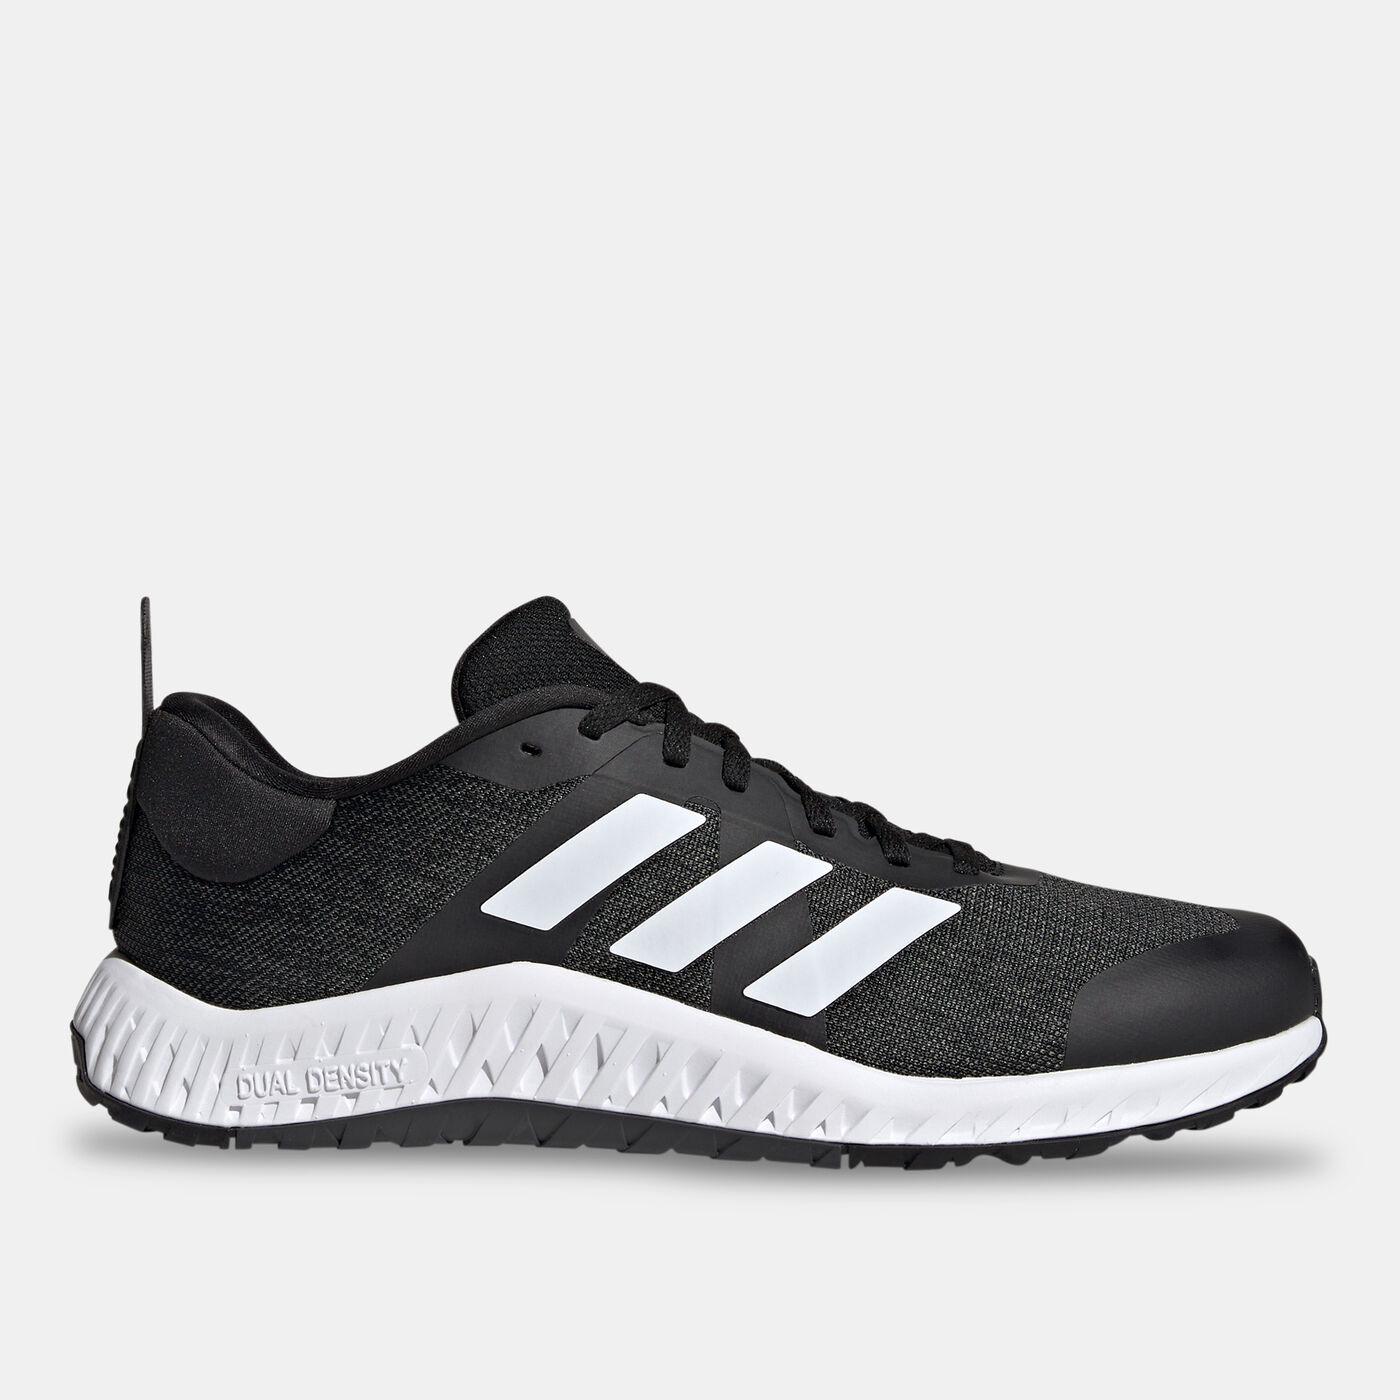 Men's Everyset Running Shoes